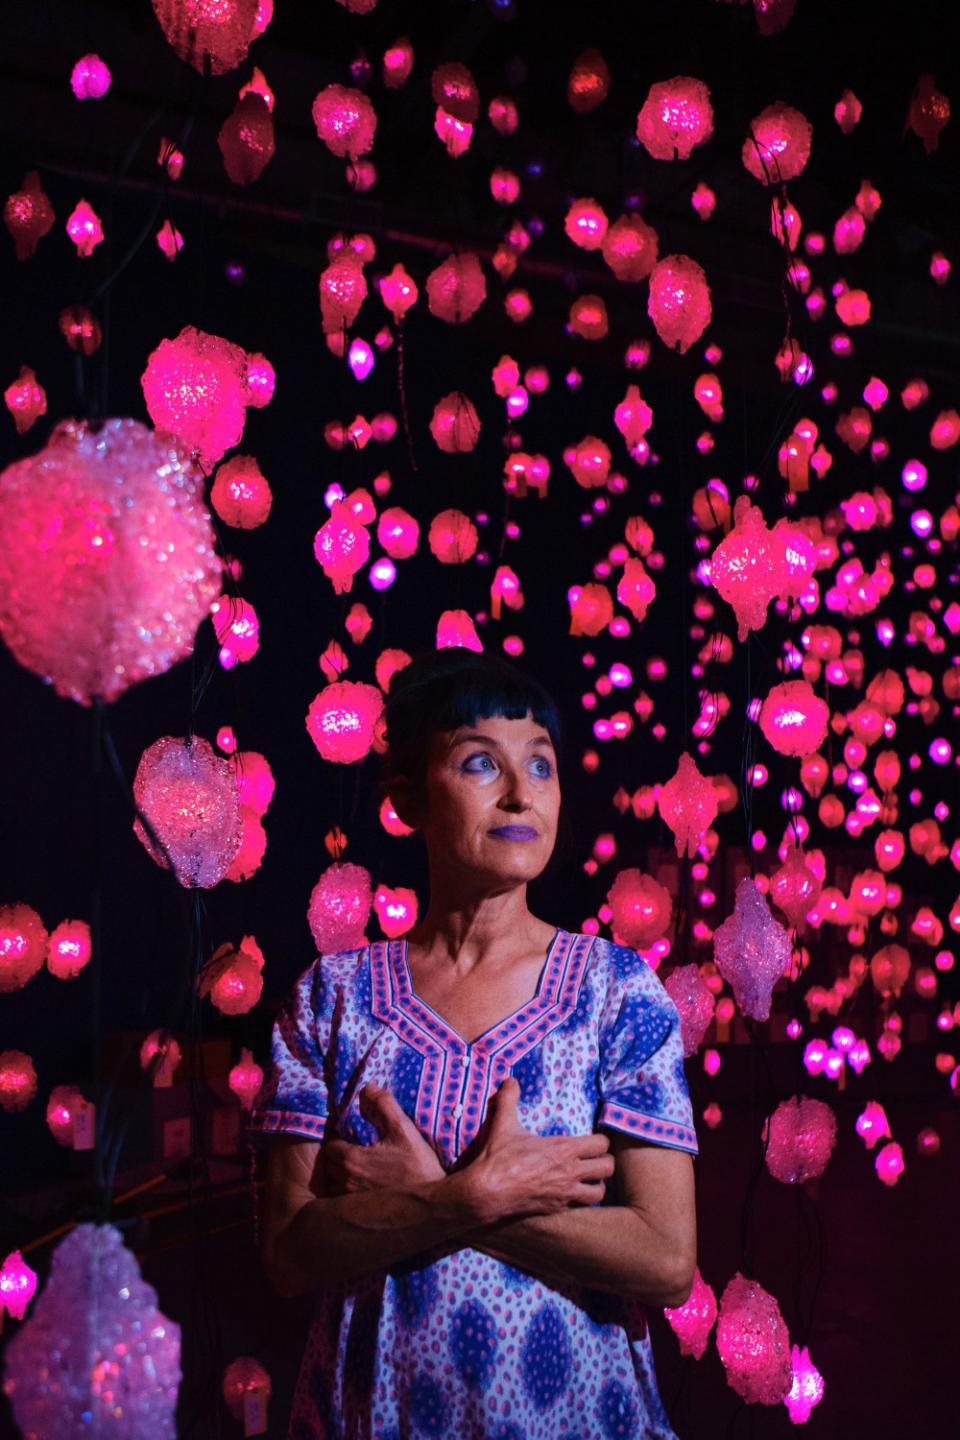 Pipilotti Rist in a blue paisley tunic stands amid dozens of pink lights